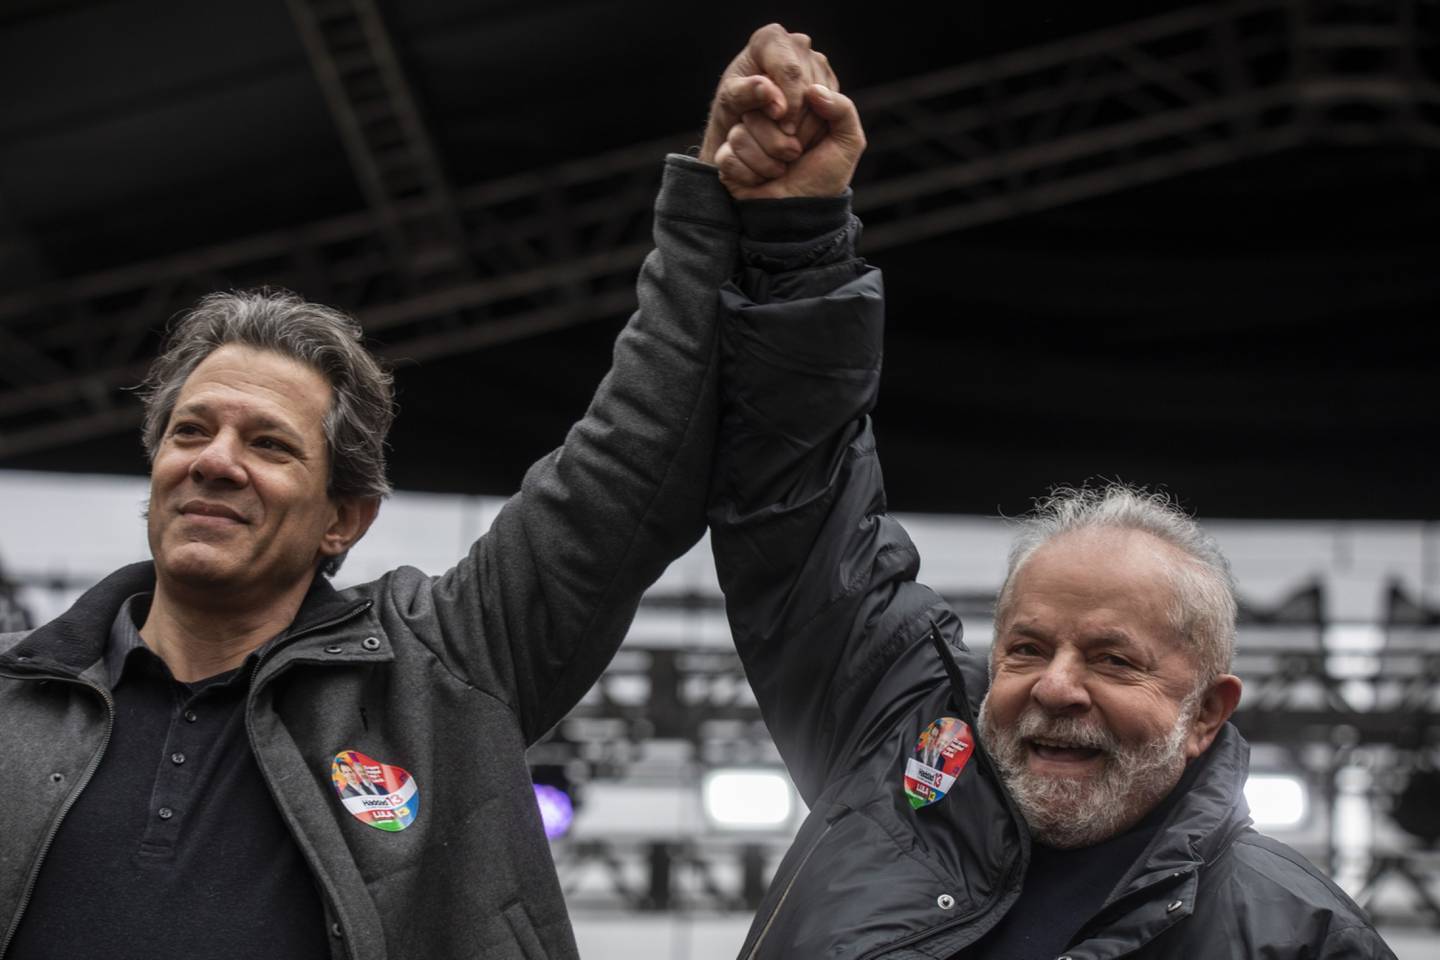 Haddad earned Lula's trust after standing by him after his imprisonment on a corruption conviction in 2017.dfd